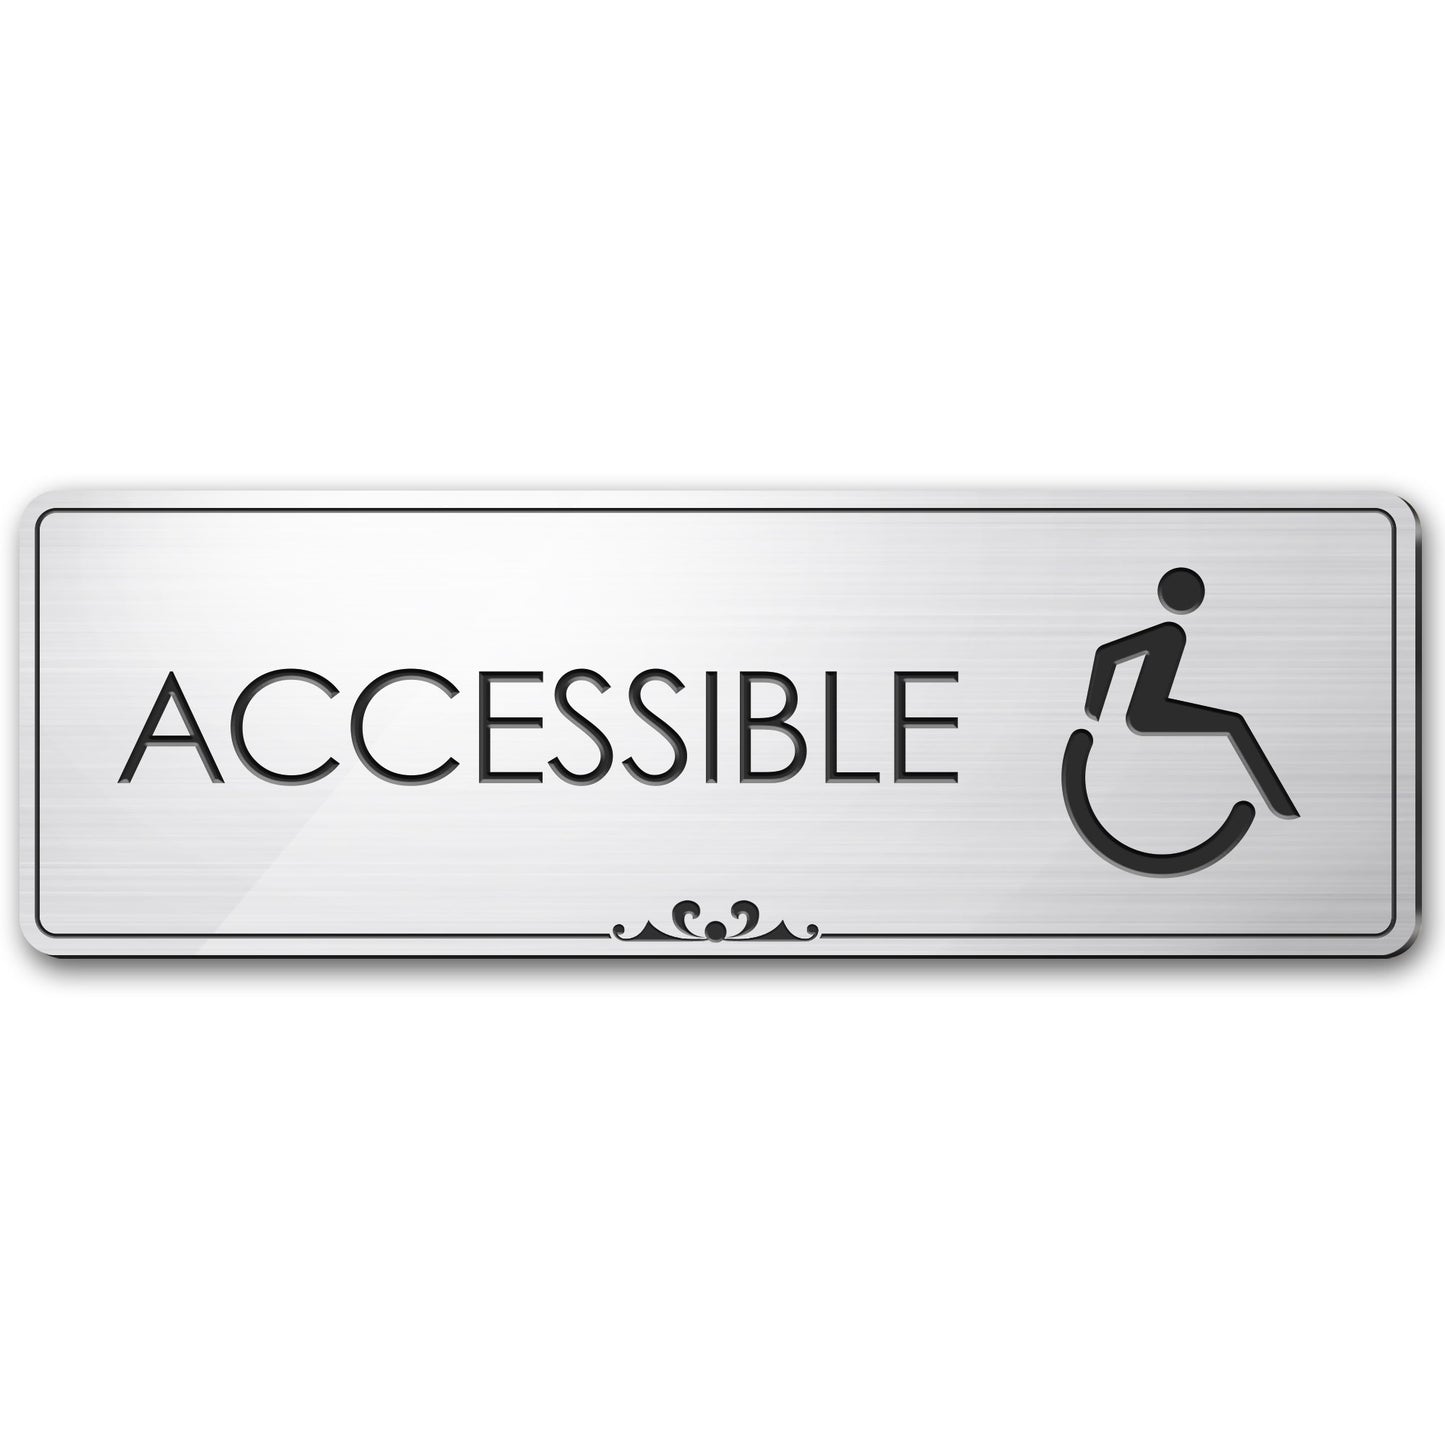 Accessible - Laser Engraved Sign